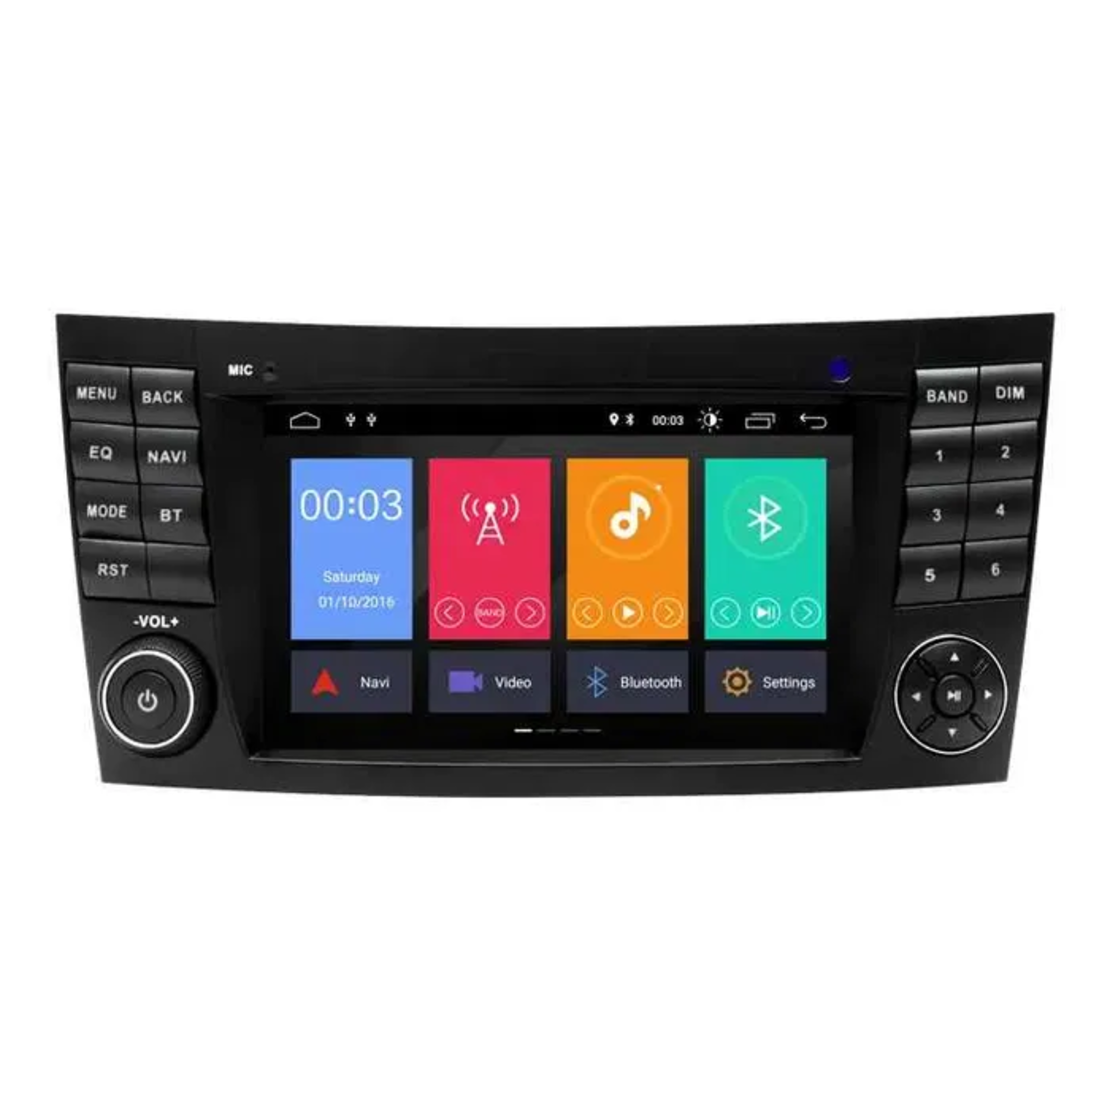 MERCEDES-BENZ W211/W219/W463 Android Navigation/Multimedia